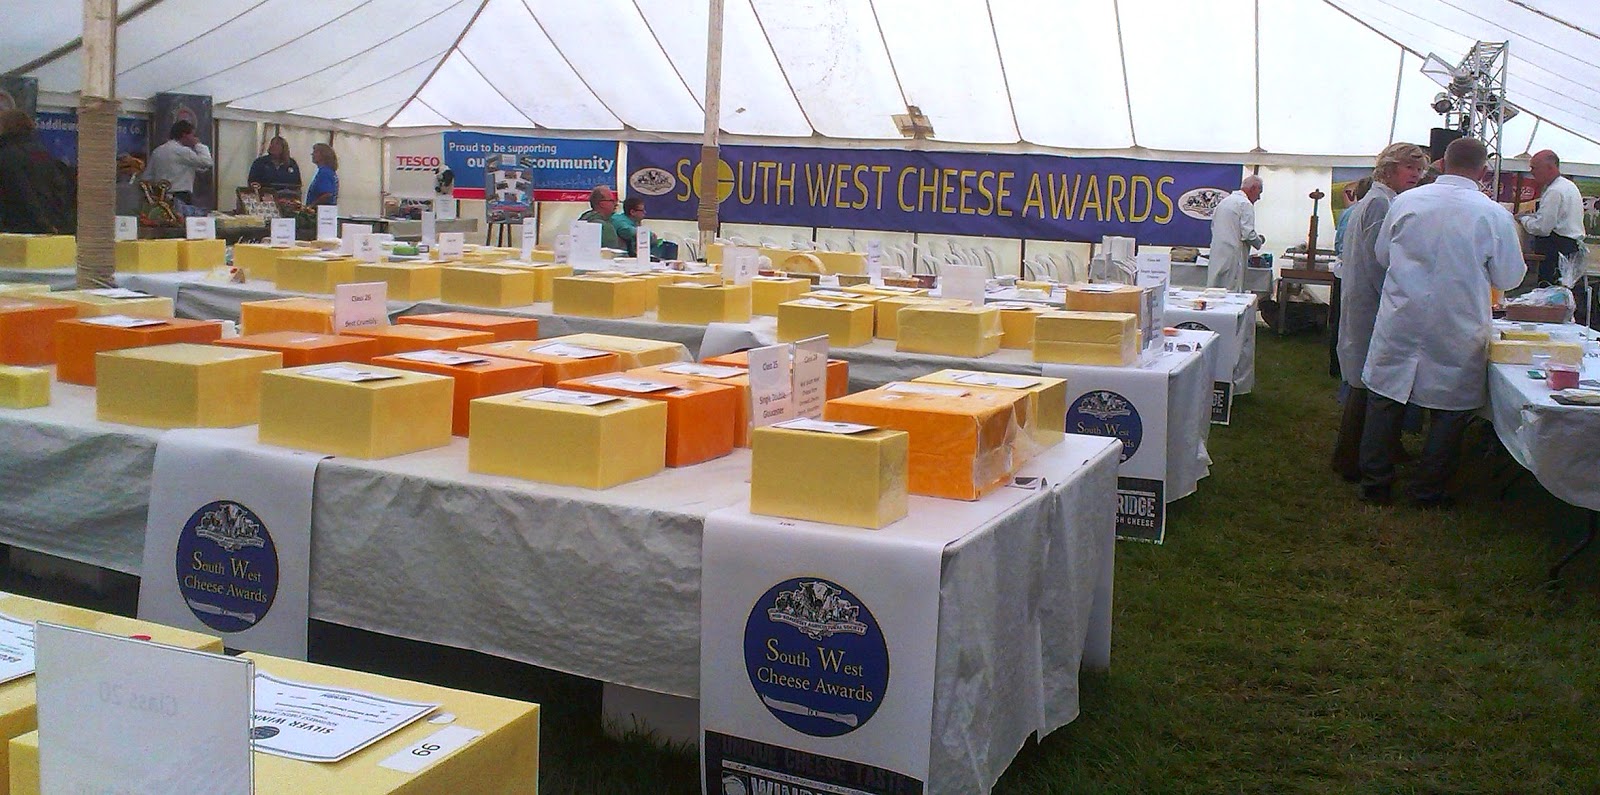 South West Cheese Awards